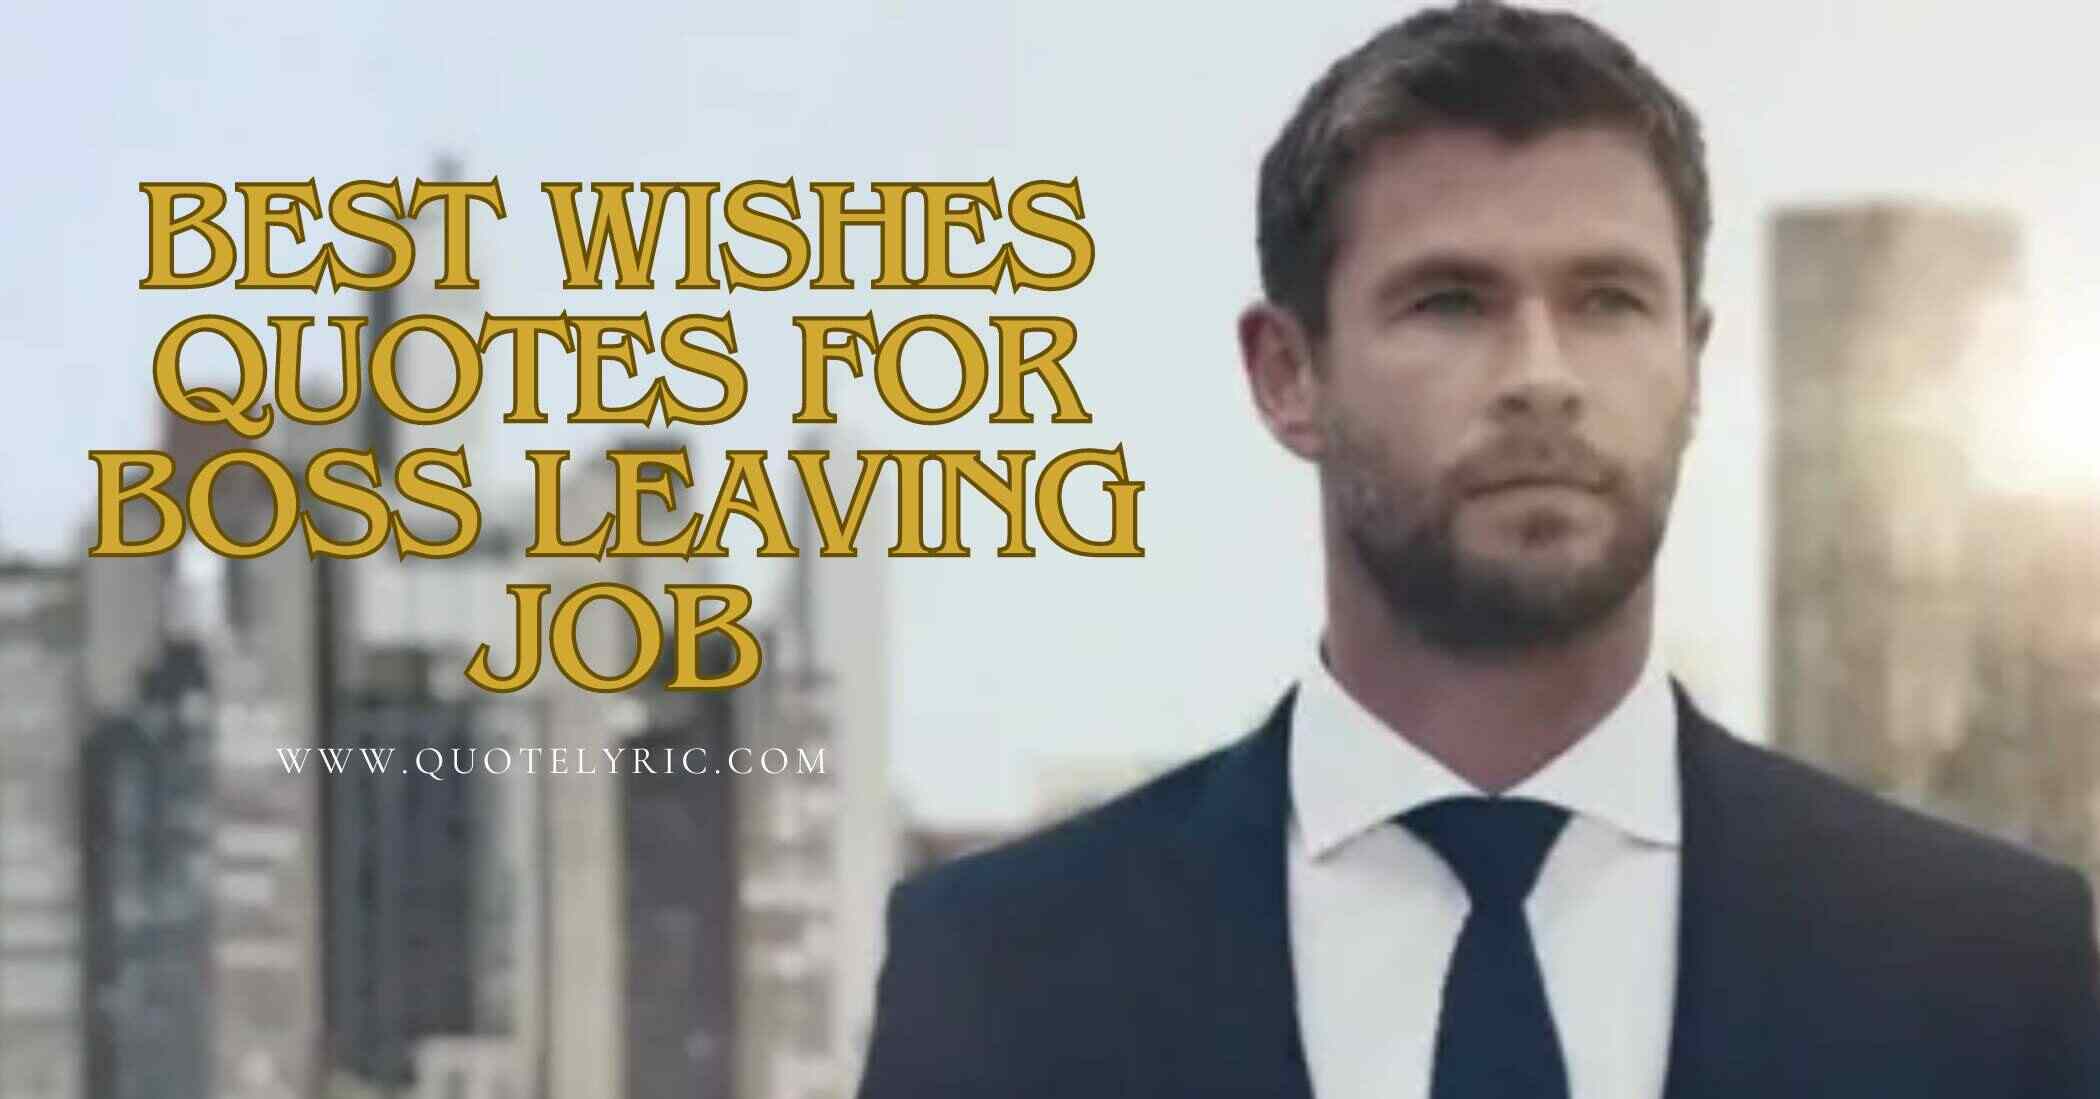 Best Wishes Quotes for Boss Leaving Job